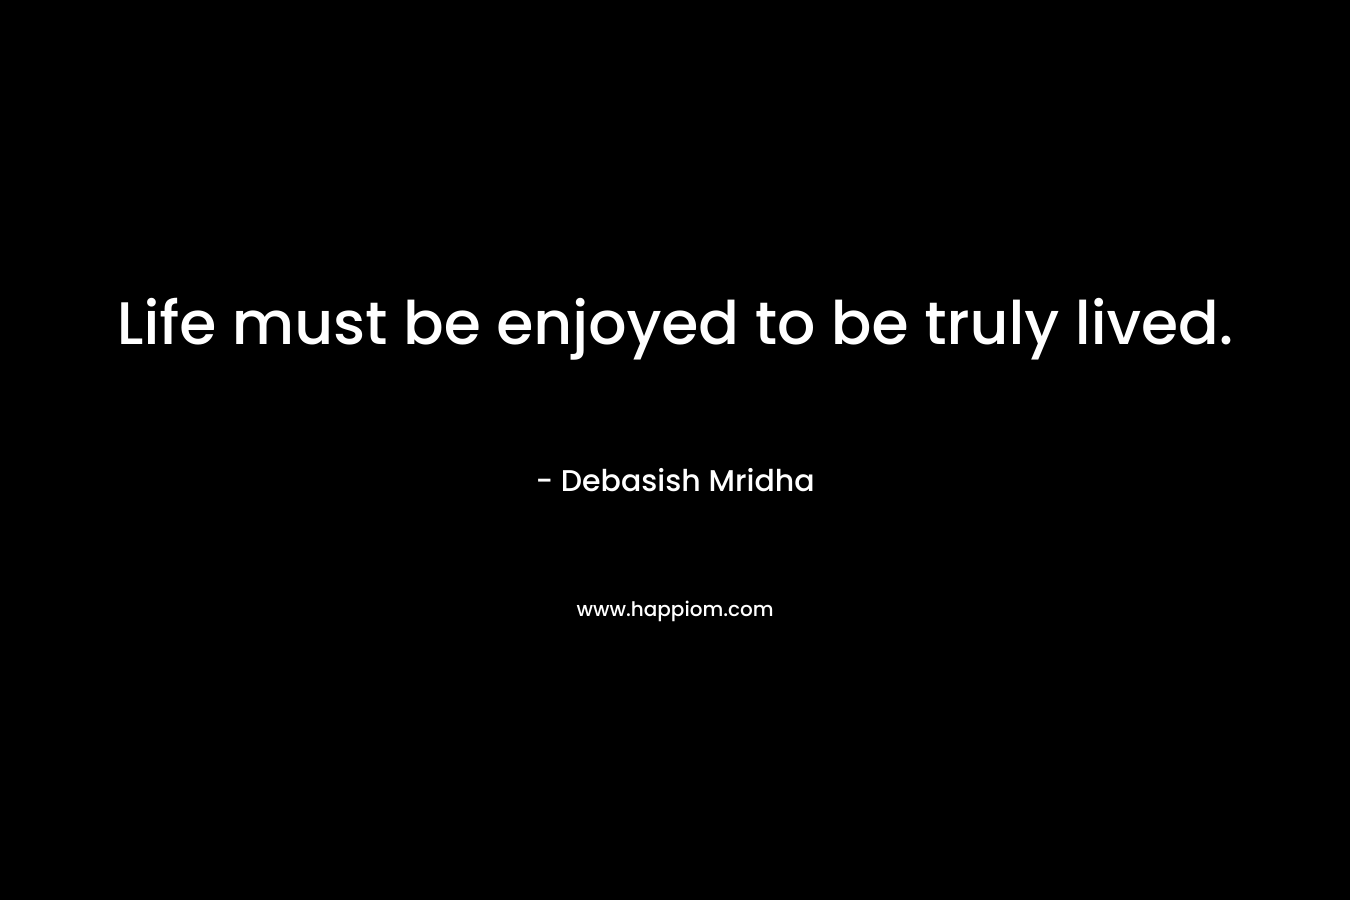 Life must be enjoyed to be truly lived.